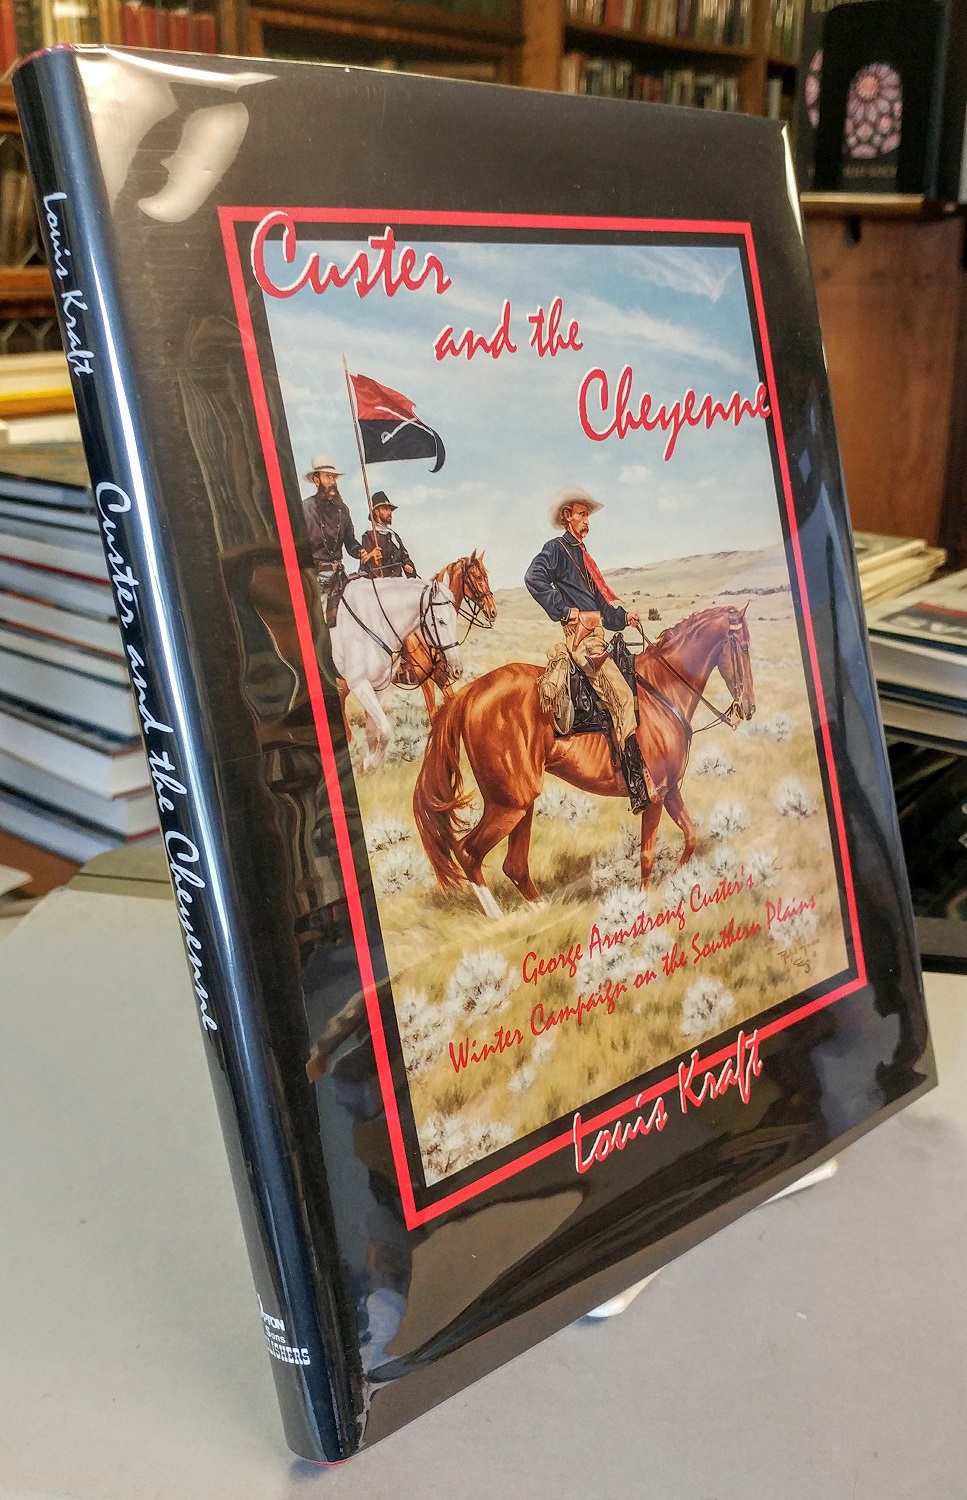 Custer and the Cheyenne: George Armstrong Custer's Winter Campaign on the Southern Plains (Custer Trails Series) by Louis Kraft (1995-05-30)